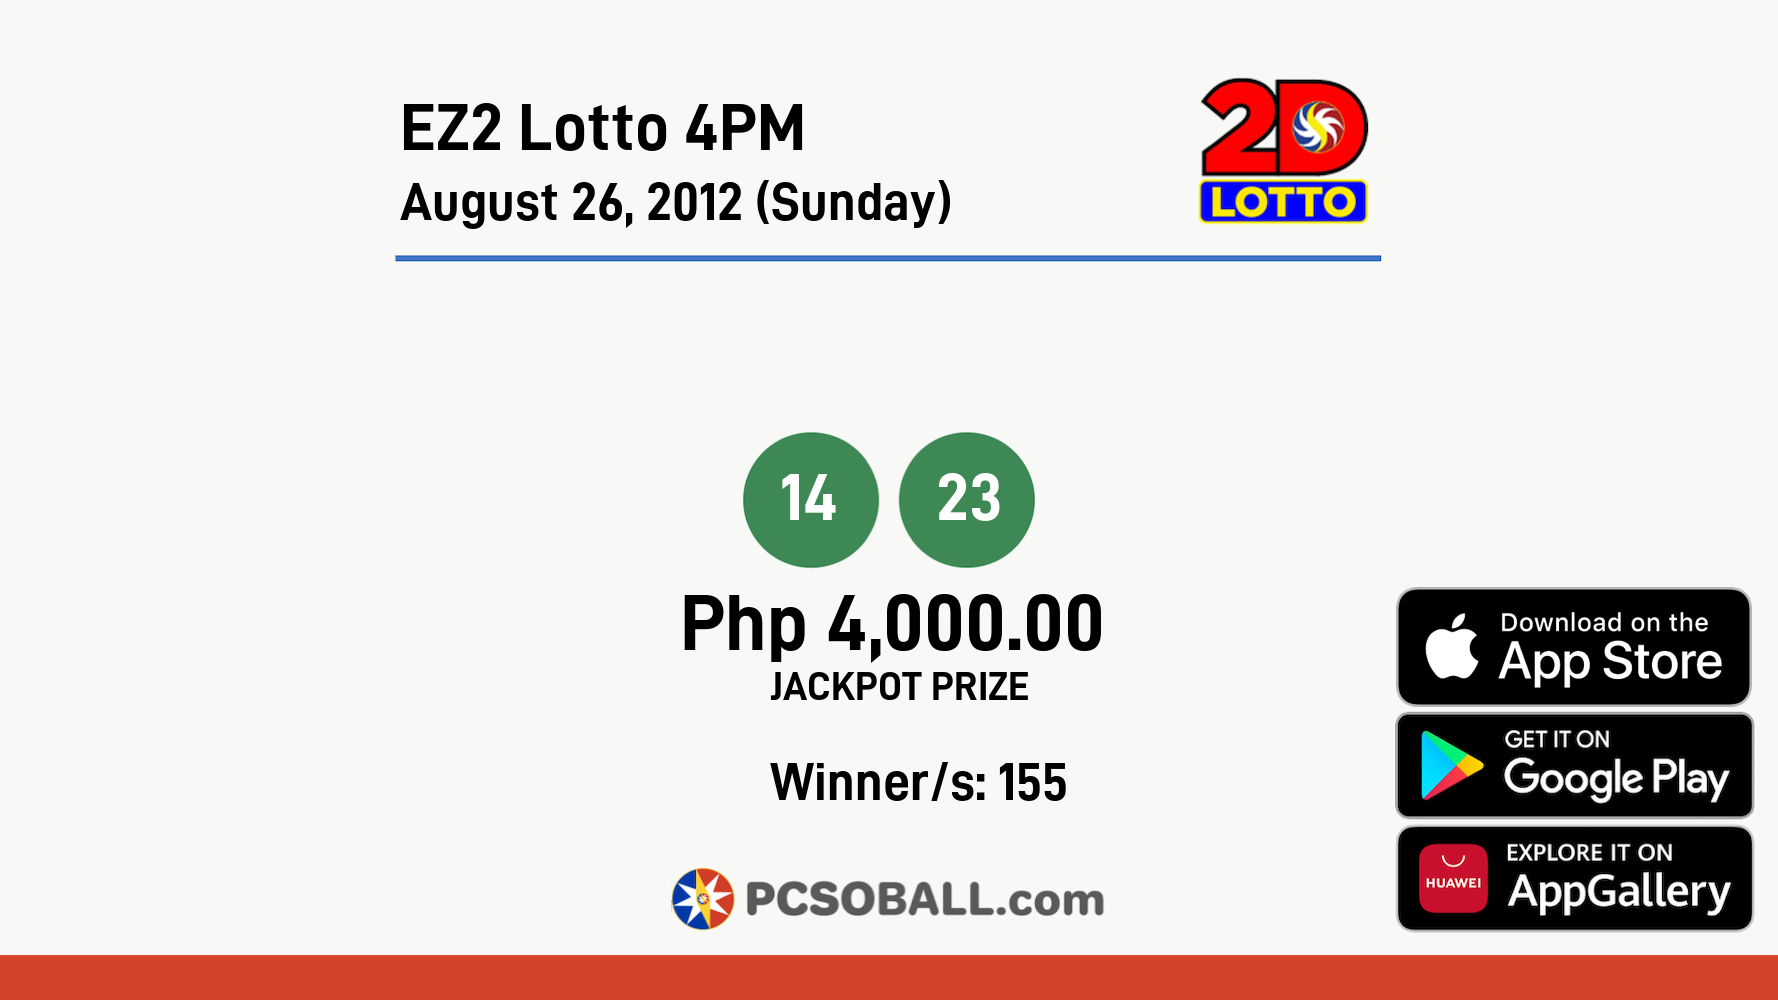 EZ2 Lotto 4PM August 26, 2012 (Sunday) Result